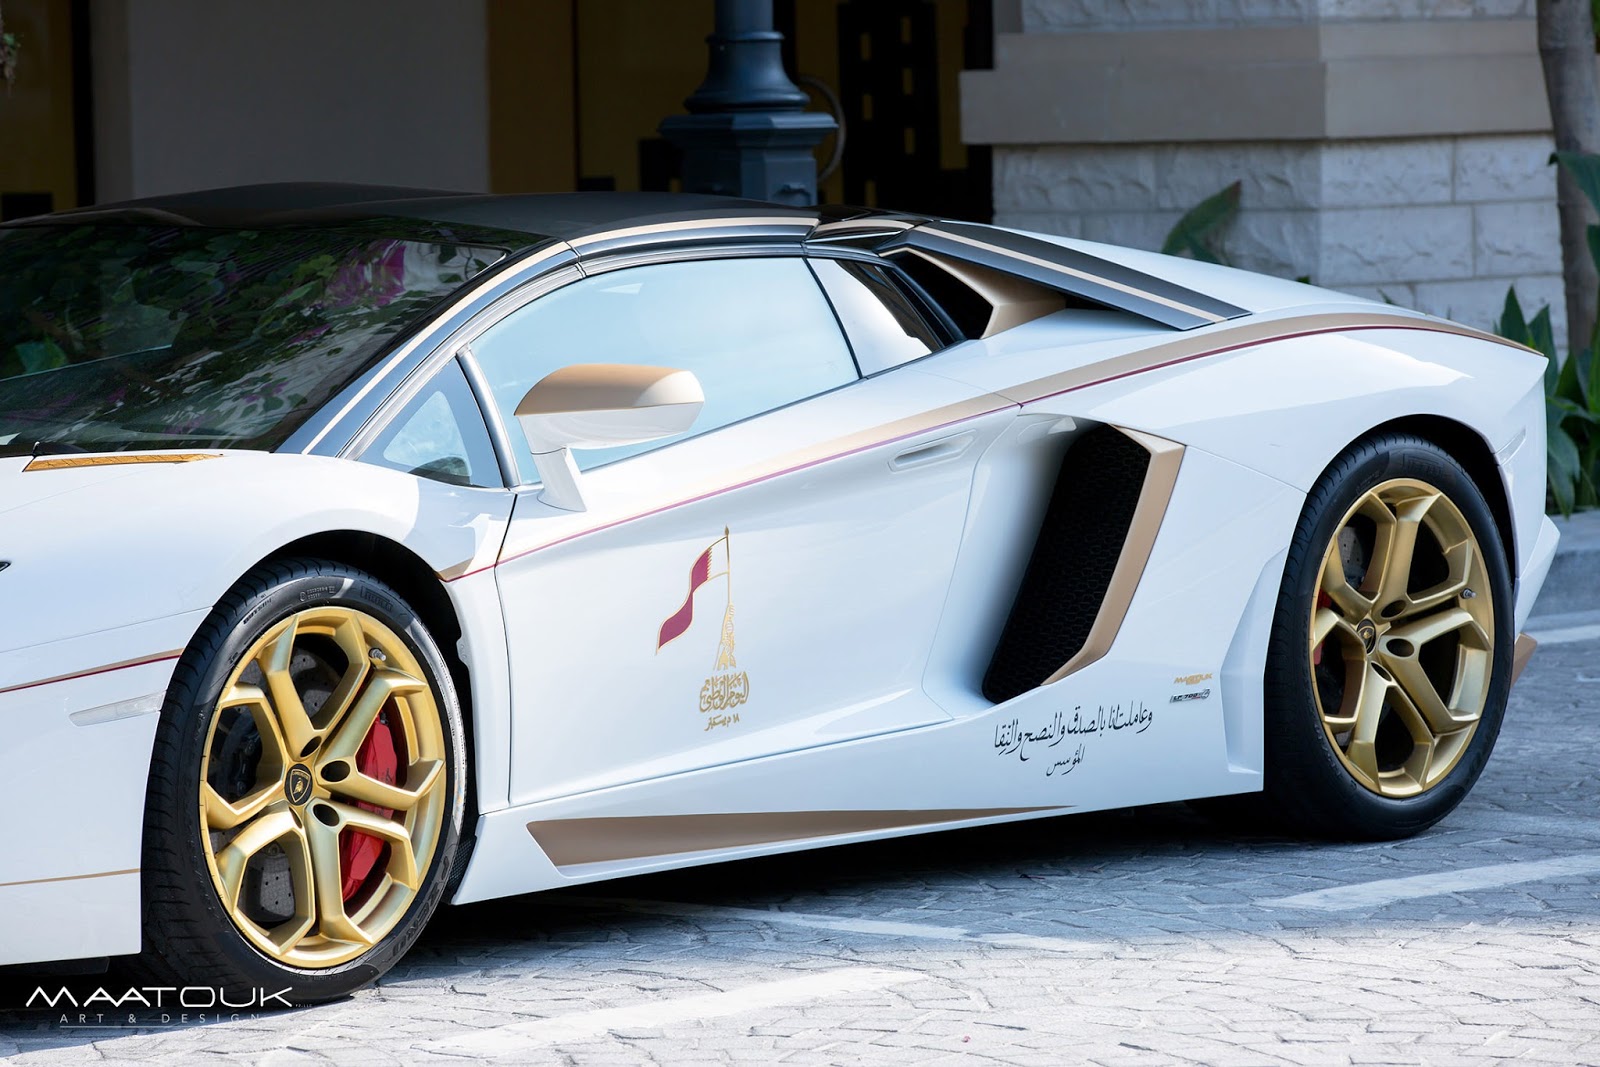 Meet the oneoff gold plated Aventador